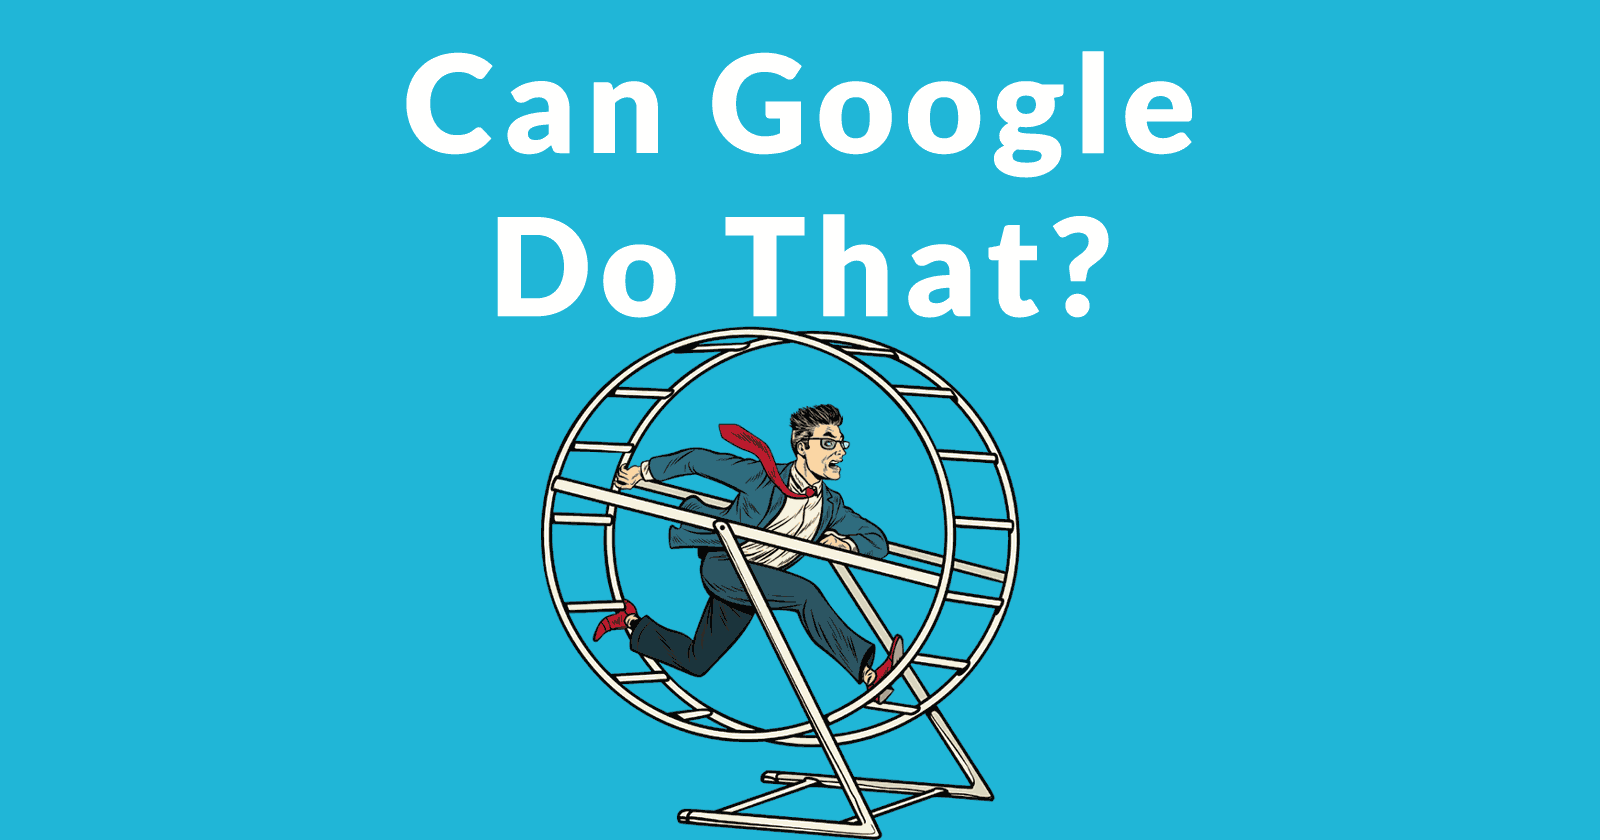 Image of a man on a hamster wheel, symbol of web publishers worried about spam links